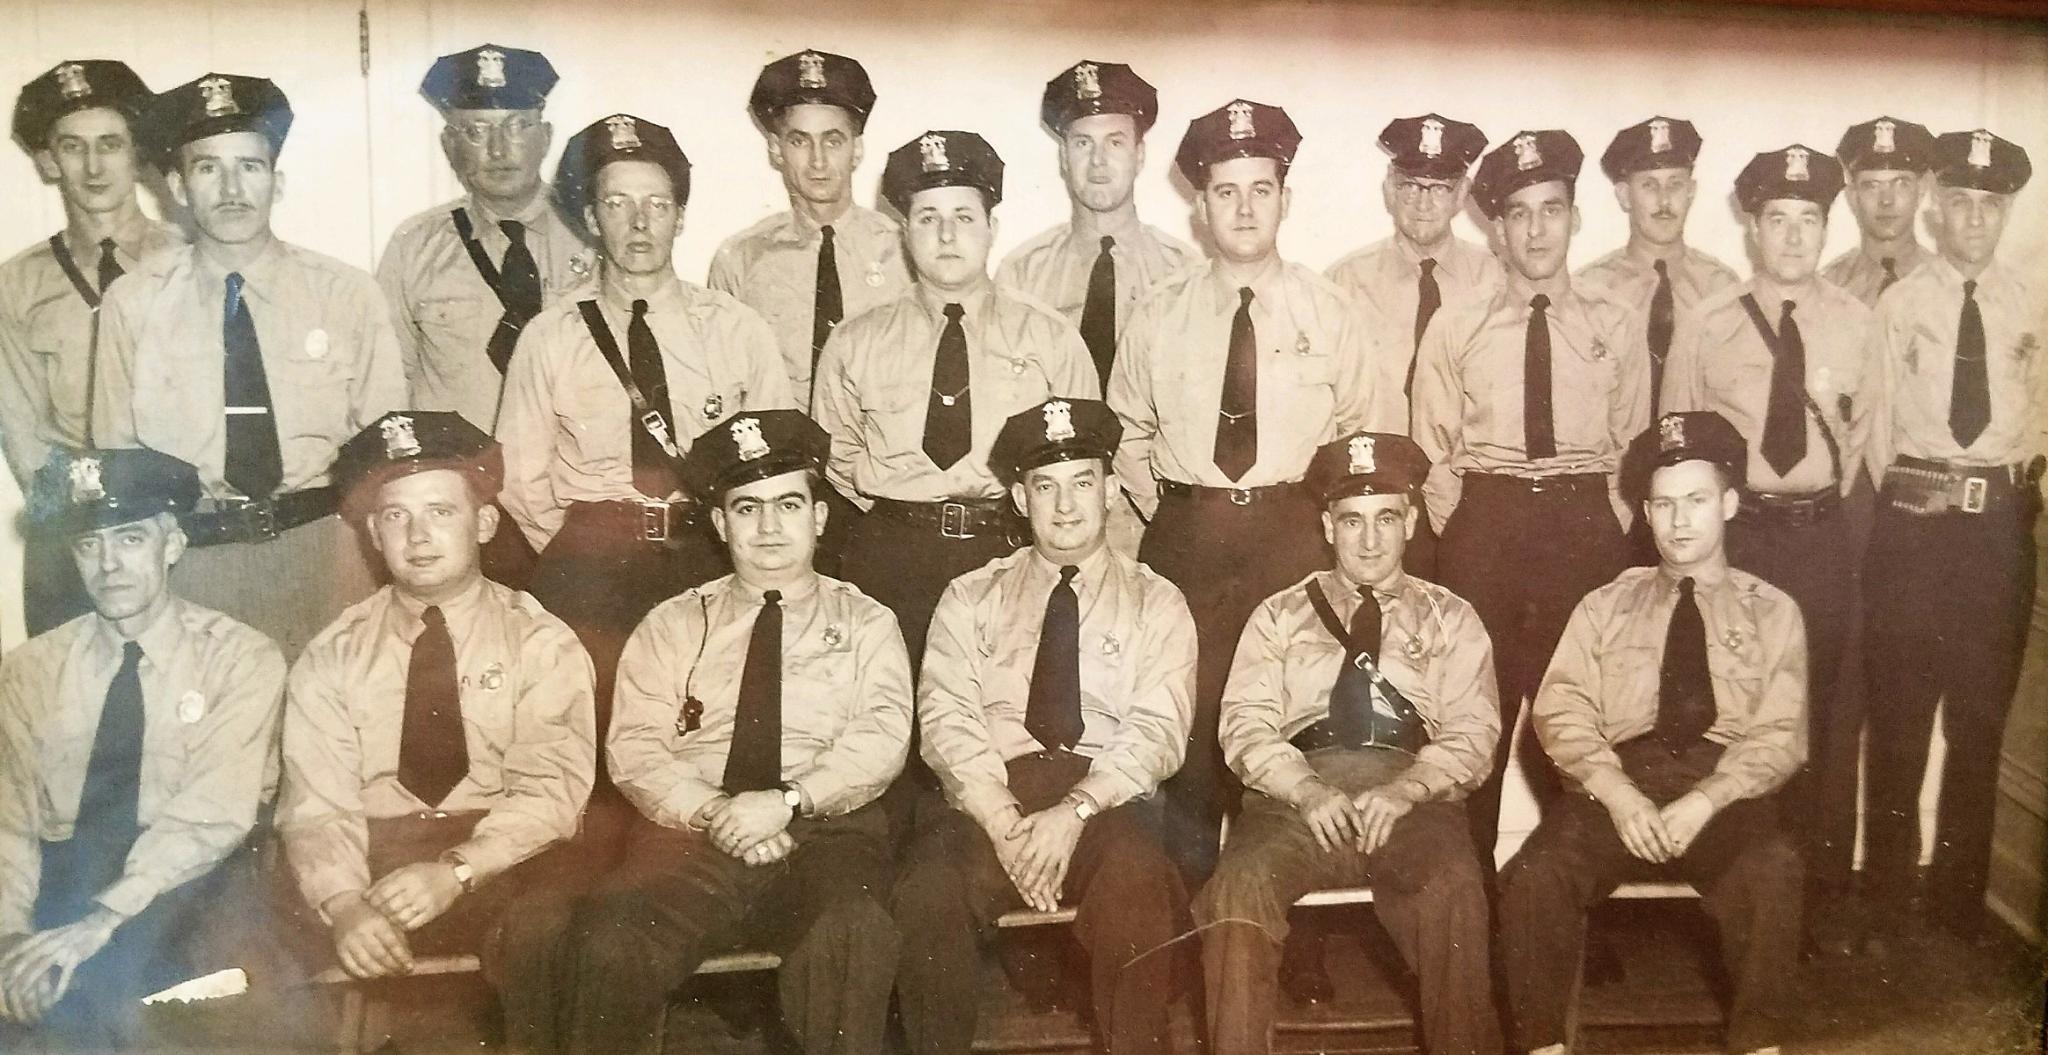 Photo provided by Westfield Police Department Officer Barry Meleen Pictured is circa 1960s photo of the Westfield policemen, both regular and auxiliary. Only one is identified, that of Robert Peterson (back row, right end with ammunition belt), Meleen's grandfather, who was police chief for many years until his retirement in 1968.